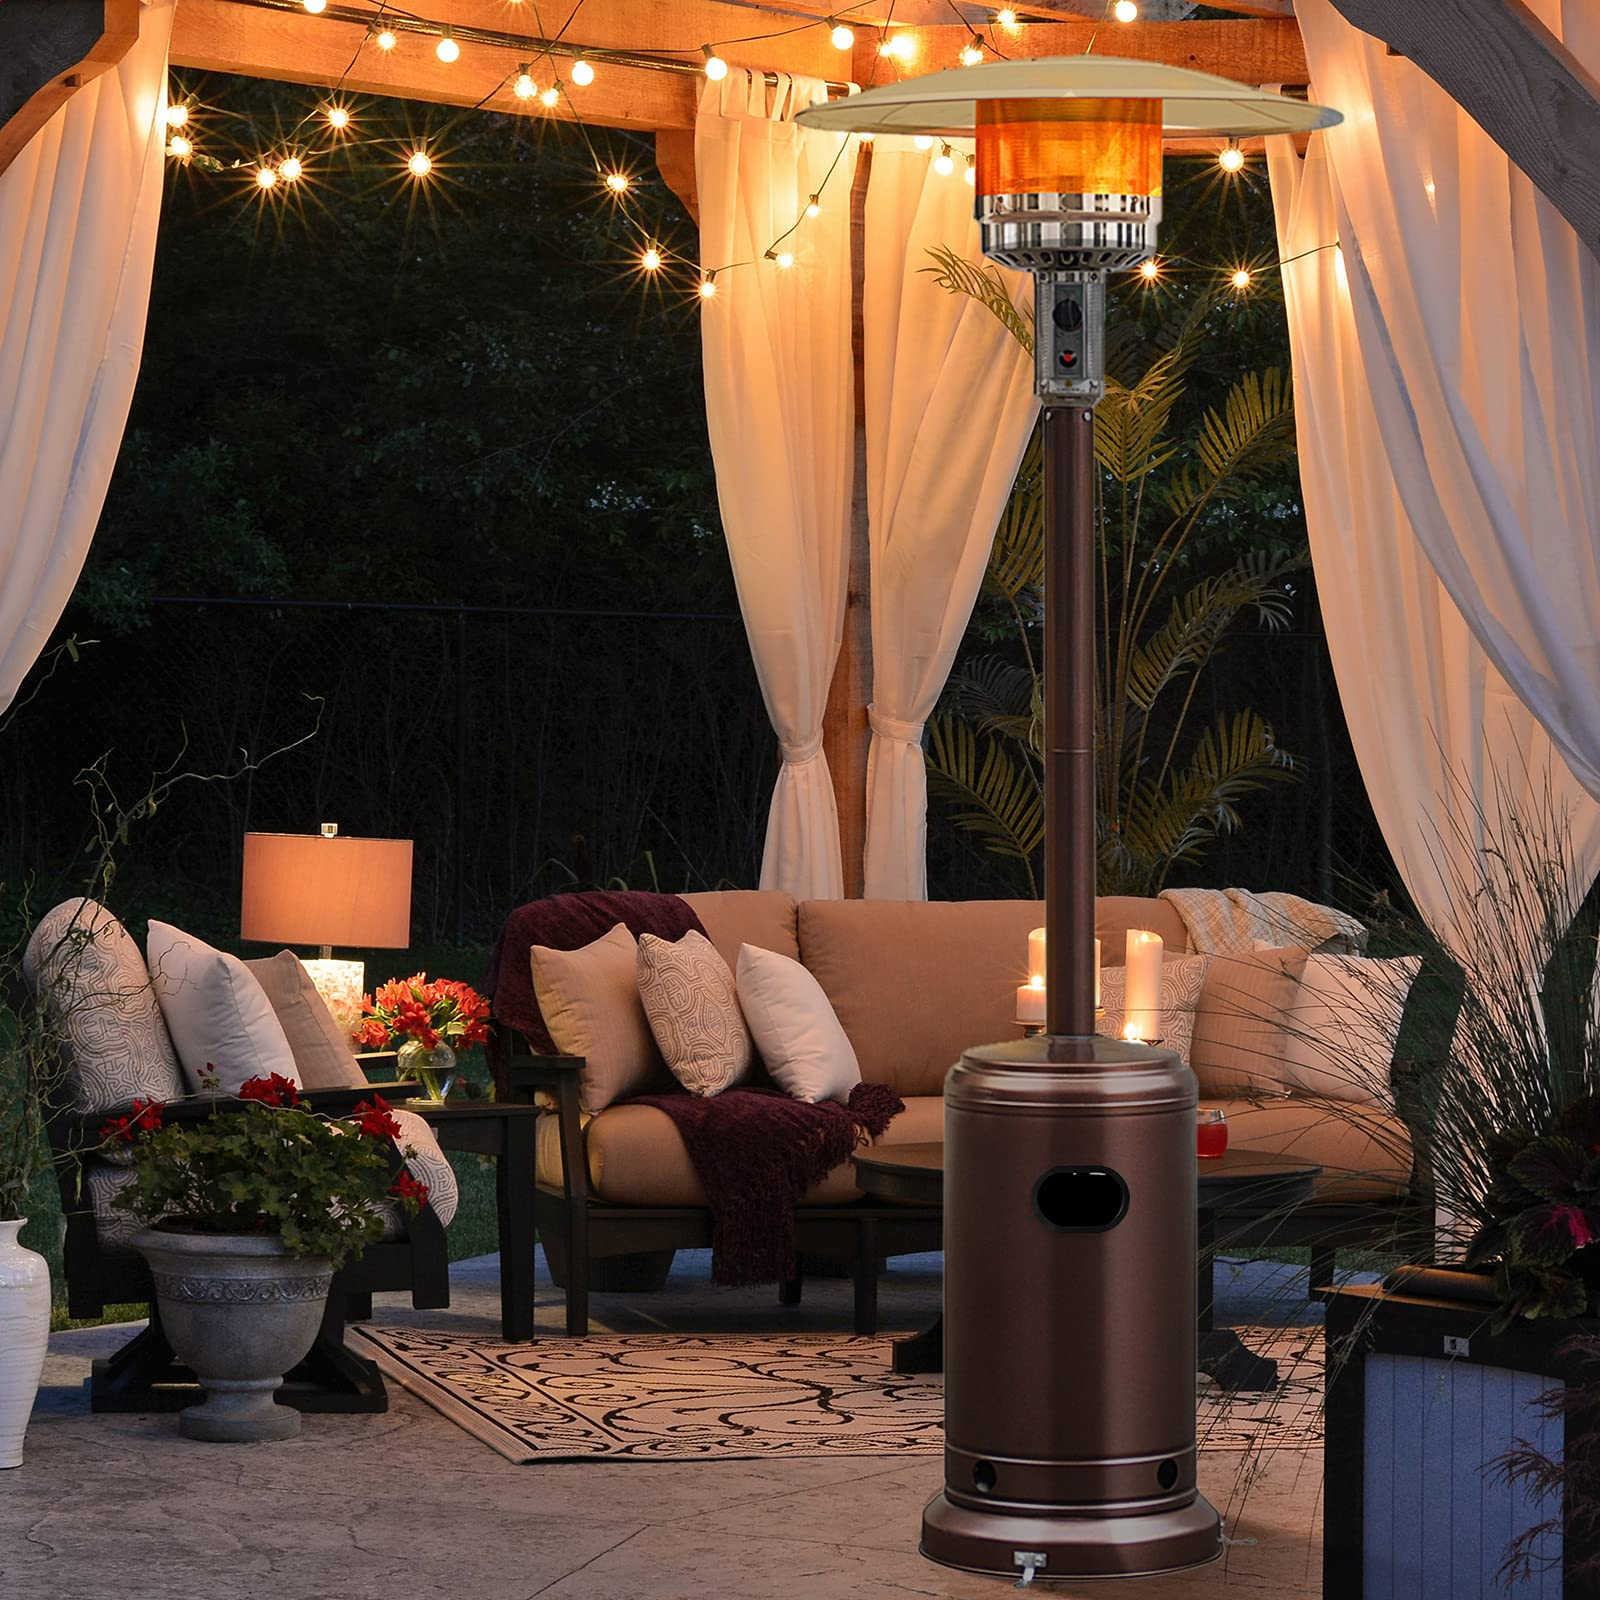 Giantex Patio Heaters for Outdoor Use, 48000 BTU Propane Outdoor Heaters with Wheels